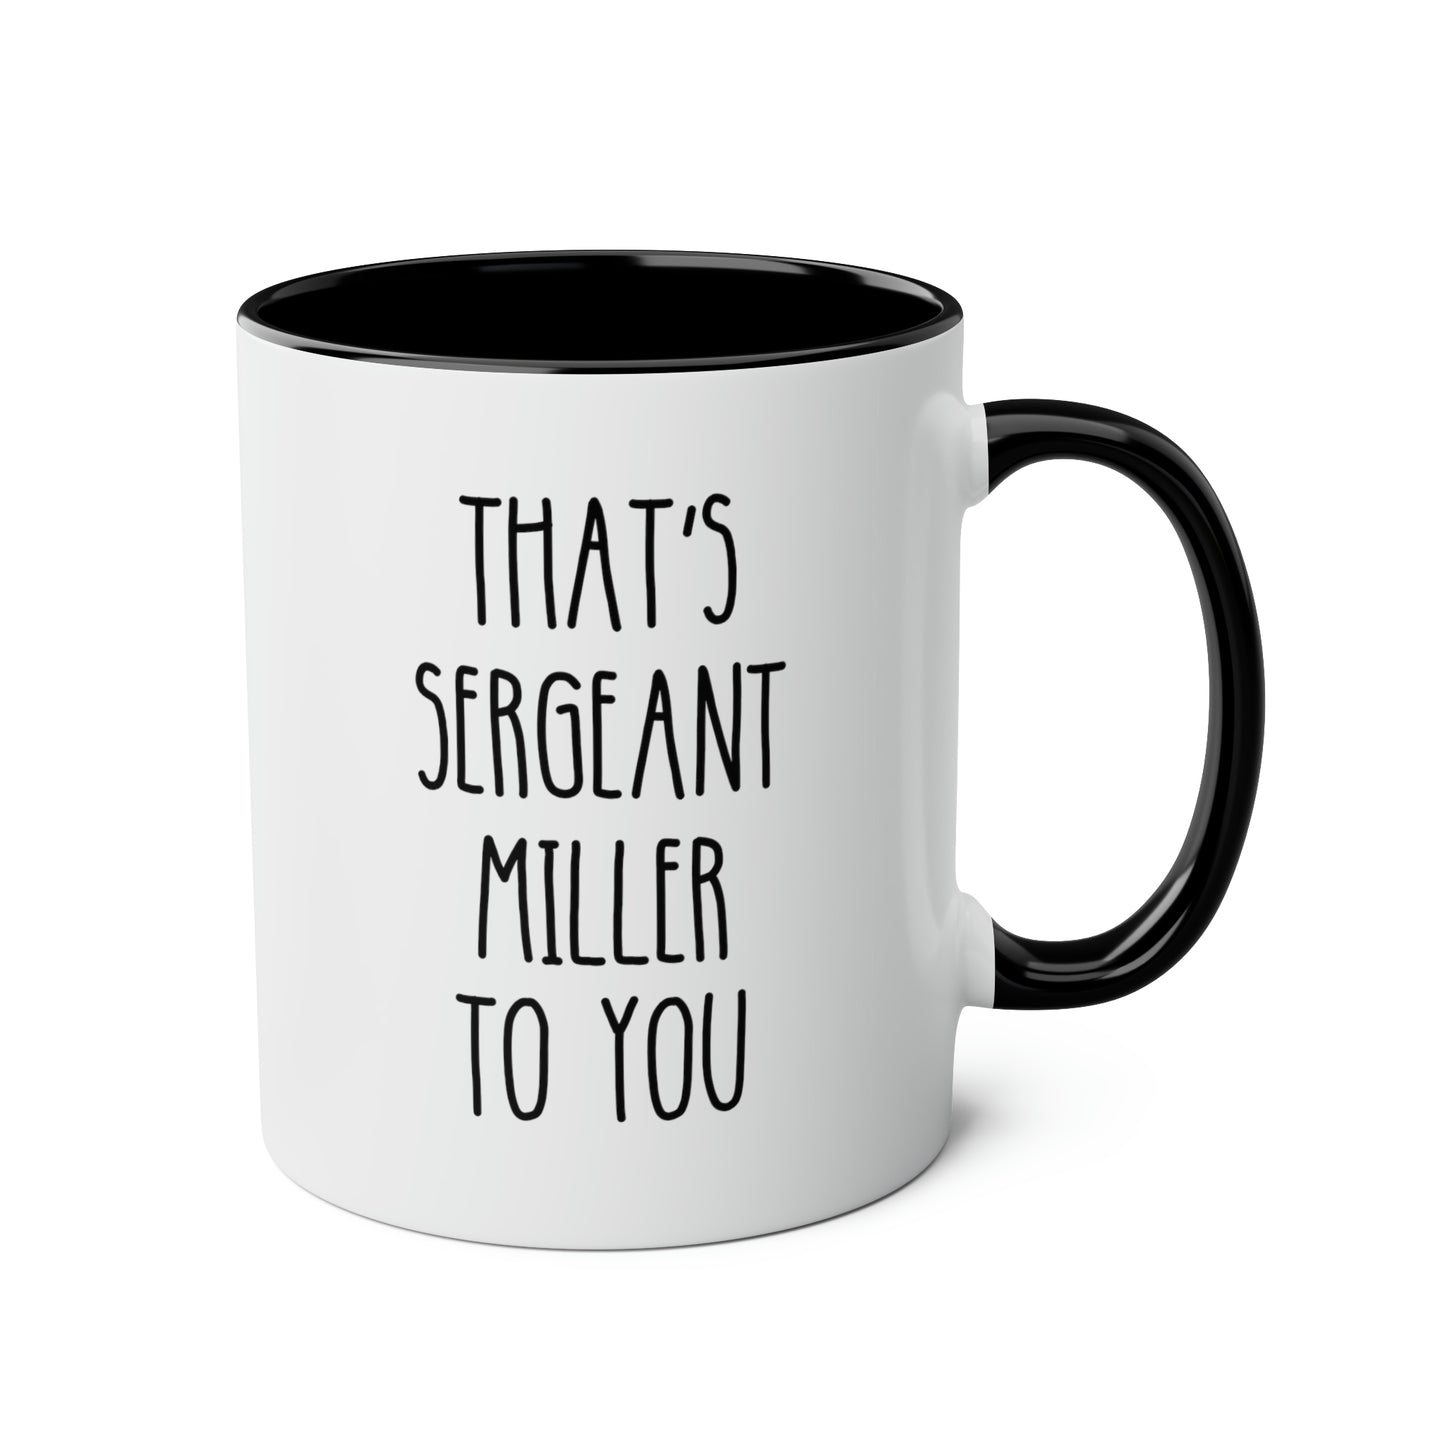 Thats Sergeant Miller To You 11oz white with black accent funny large coffee mug gift for sergeant cop police promotion appreciation gift waveywares wavey wares wavywares wavy wares